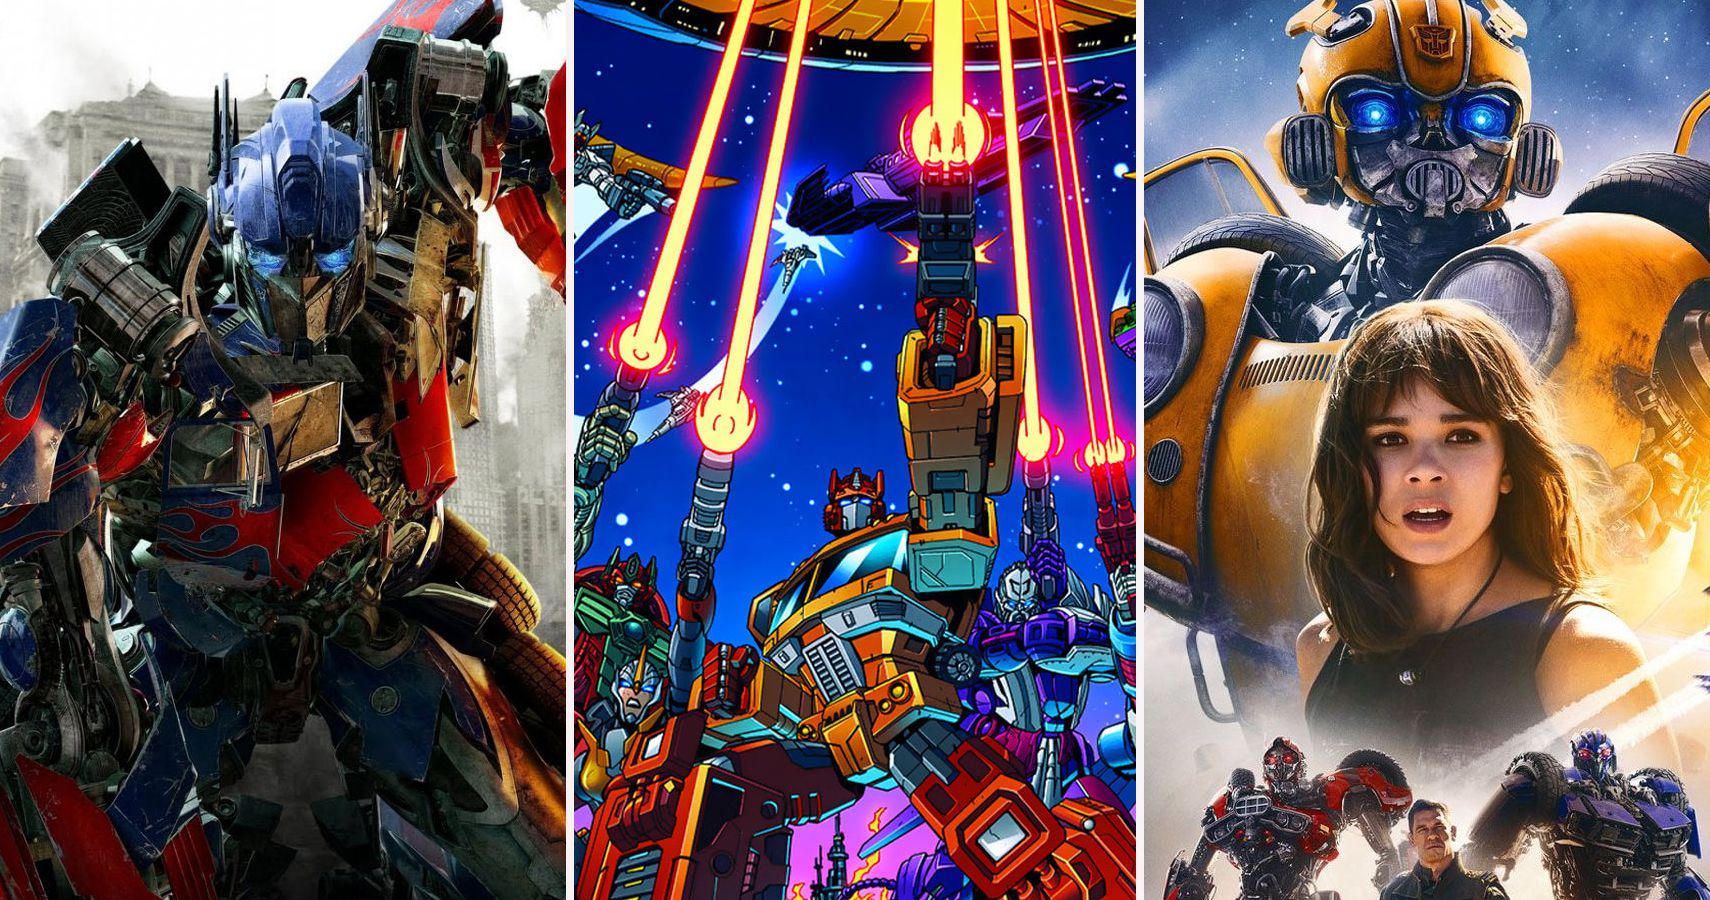 Transformers Every Movie Poster, Ranked